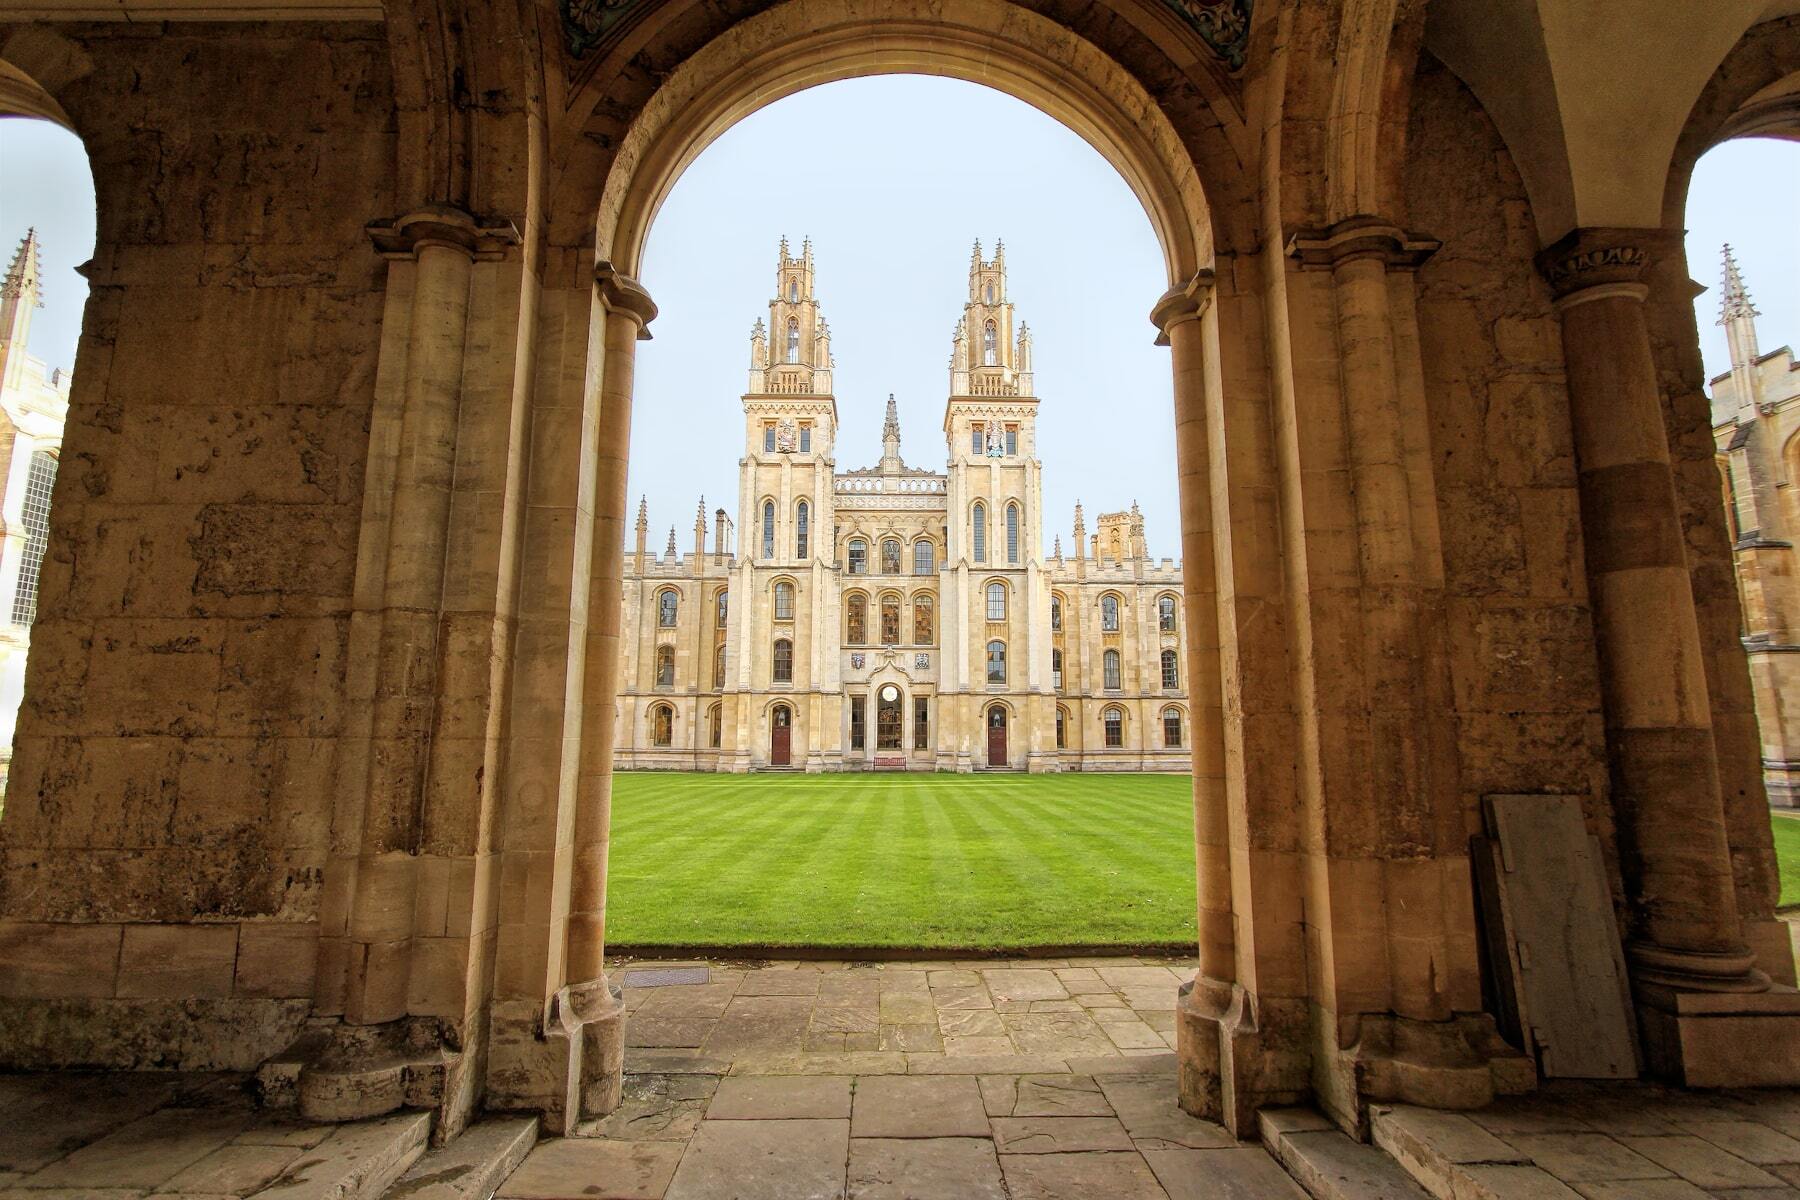 <p>Cambridge’s main rival, <a href="https://www.ox.ac.uk/" class="atom_link atom_valid" rel="noreferrer noopener">Oxford University</a>, boasts more than 38 striking colleges filled with romantic libraries on a historic campus. Considered one of the best universities in the world, it’s also the oldest English-language university, with evidence of teaching in some form dating as far back as 1096. Its incredible scenery was also frequently used as a <a href="https://www.experienceoxfordshire.org/oxford-harry-potter/" class="atom_link atom_valid" rel="noreferrer noopener">backdrop</a> for the Harry Potter movies.</p>